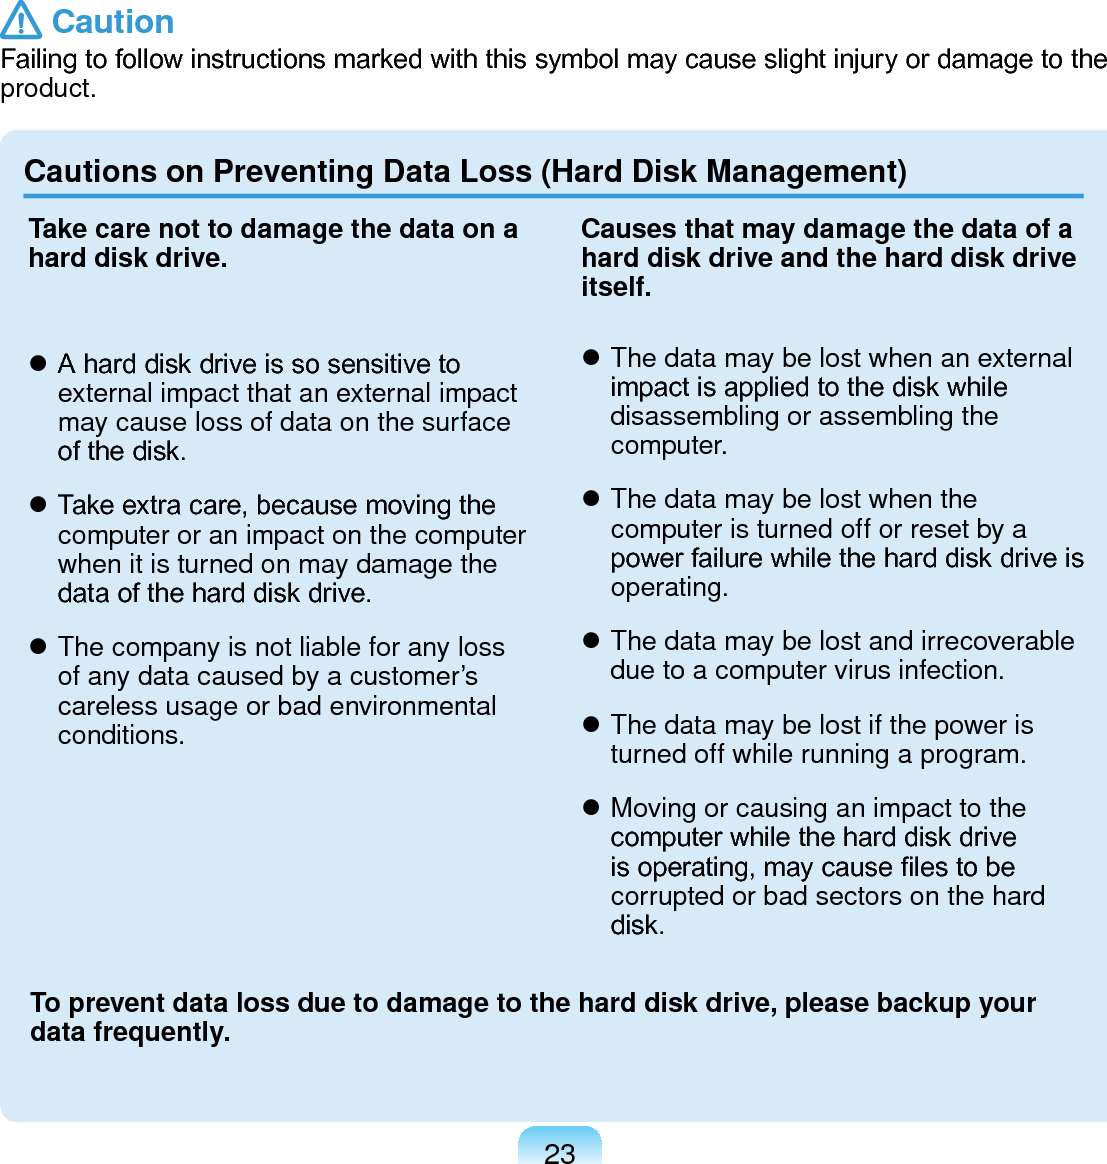 23Cautions on Preventing Data Loss (Hard Disk Management)Take care not to damage the data on a hard disk drive. A hard disk drive is so sensitive to external impact that an external impact may cause loss of data on the surface of the disk. Take extra care, because moving the computer or an impact on the computer when it is turned on may damage the data of the hard disk drive. The company is not liable for any loss of any data caused by a customer’s careless usage or bad environmental conditions.Causes that may damage the data of a hard disk drive and the hard disk drive itself. The data may be lost when an external impact is applied to the disk while disassembling or assembling the computer. The data may be lost when the computer is turned off or reset by a power failure while the hard disk drive is operating. The data may be lost and irrecoverable due to a computer virus infection. The data may be lost if the power is turned off while running a program. Moving or causing an impact to the computer while the hard disk drive is operating, may cause les to be corrupted or bad sectors on the hard disk.To prevent data loss due to damage to the hard disk drive, please backup your data frequently. CautionFailing to follow instructions marked with this symbol may cause slight injury or damage to the product.